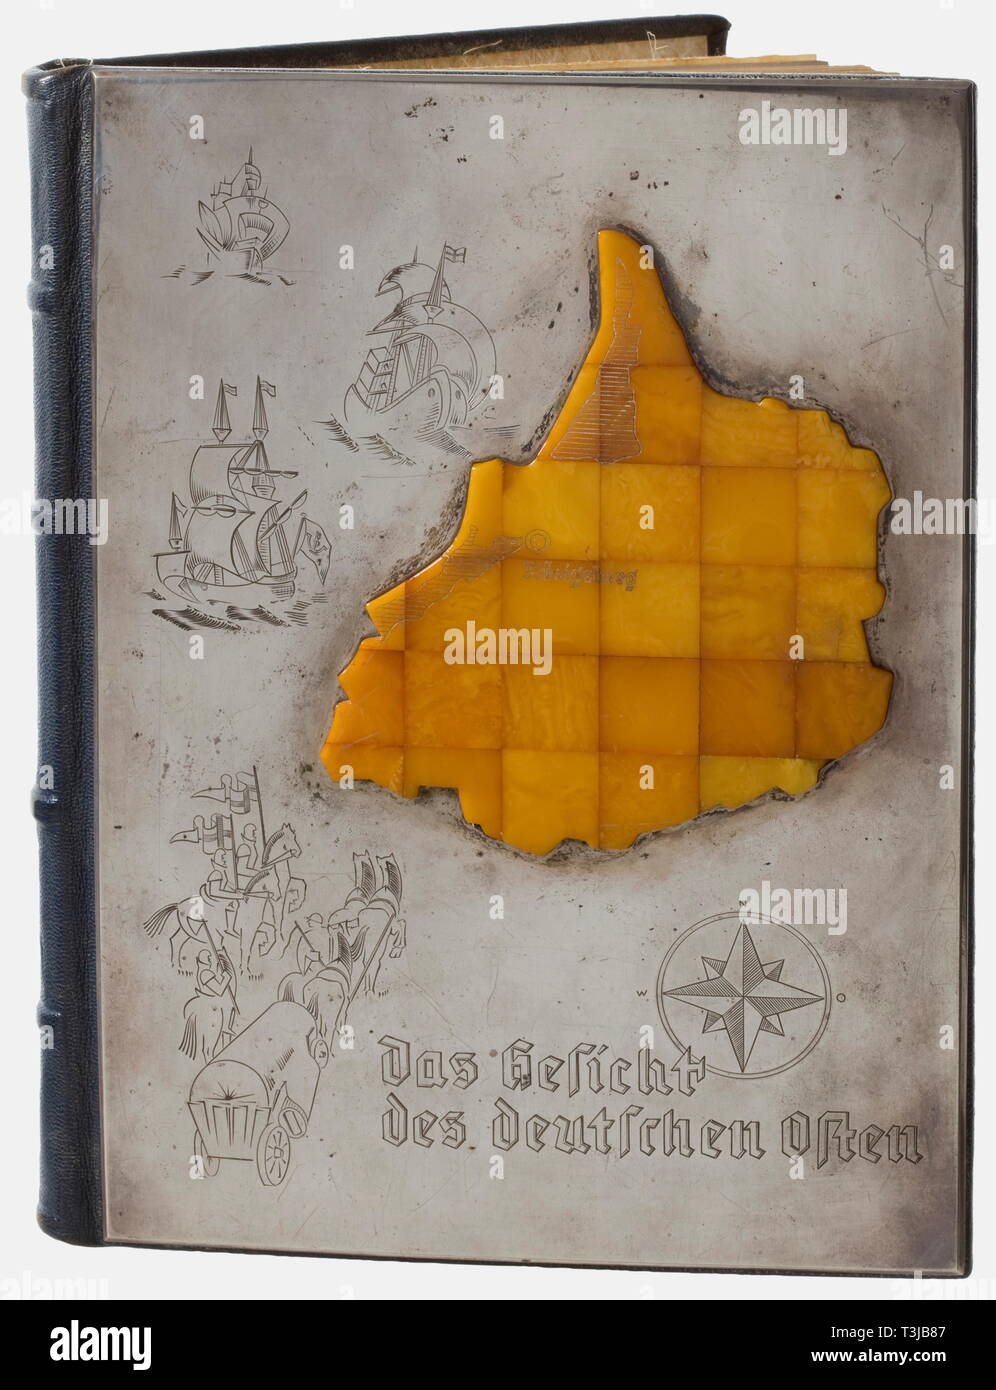 A deluxe edition 'Das malerische Ostpreußen', from a distinguished German amber collection Illustrated book on East Prussia with 122 photographs and a preface by Gauleiter Erich Koch. 215 pages (partially damaged/spotted/one missing?), publ. by Gräfe und Unzer, Königsberg, no date. Blue leather cover, the front applied with a silver plaque bearing an amber panelled image of East Prussia with the engraved portrayal of Königsberg, the silver plaque also engraved, offshore the coast of East Prussia three cogs and a horse cart coming from West Prussia protected by knights. The , Editorial-Use-Only Stock Photo